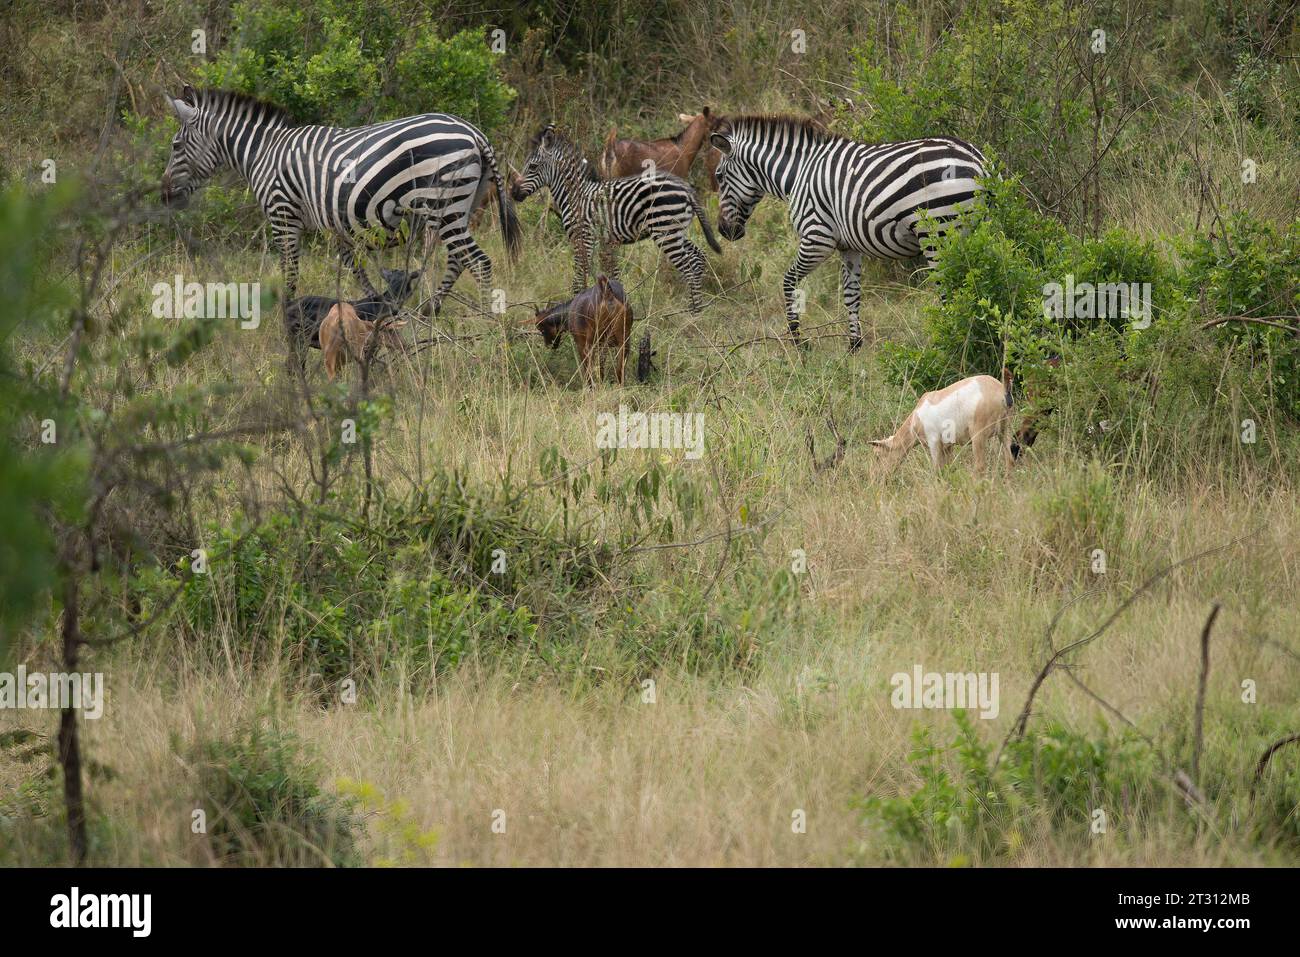 Zebra can be seen as competition to domestic livestock like goats, a low-level instance of human-wildlife conflict that conservation needs to address. Stock Photo